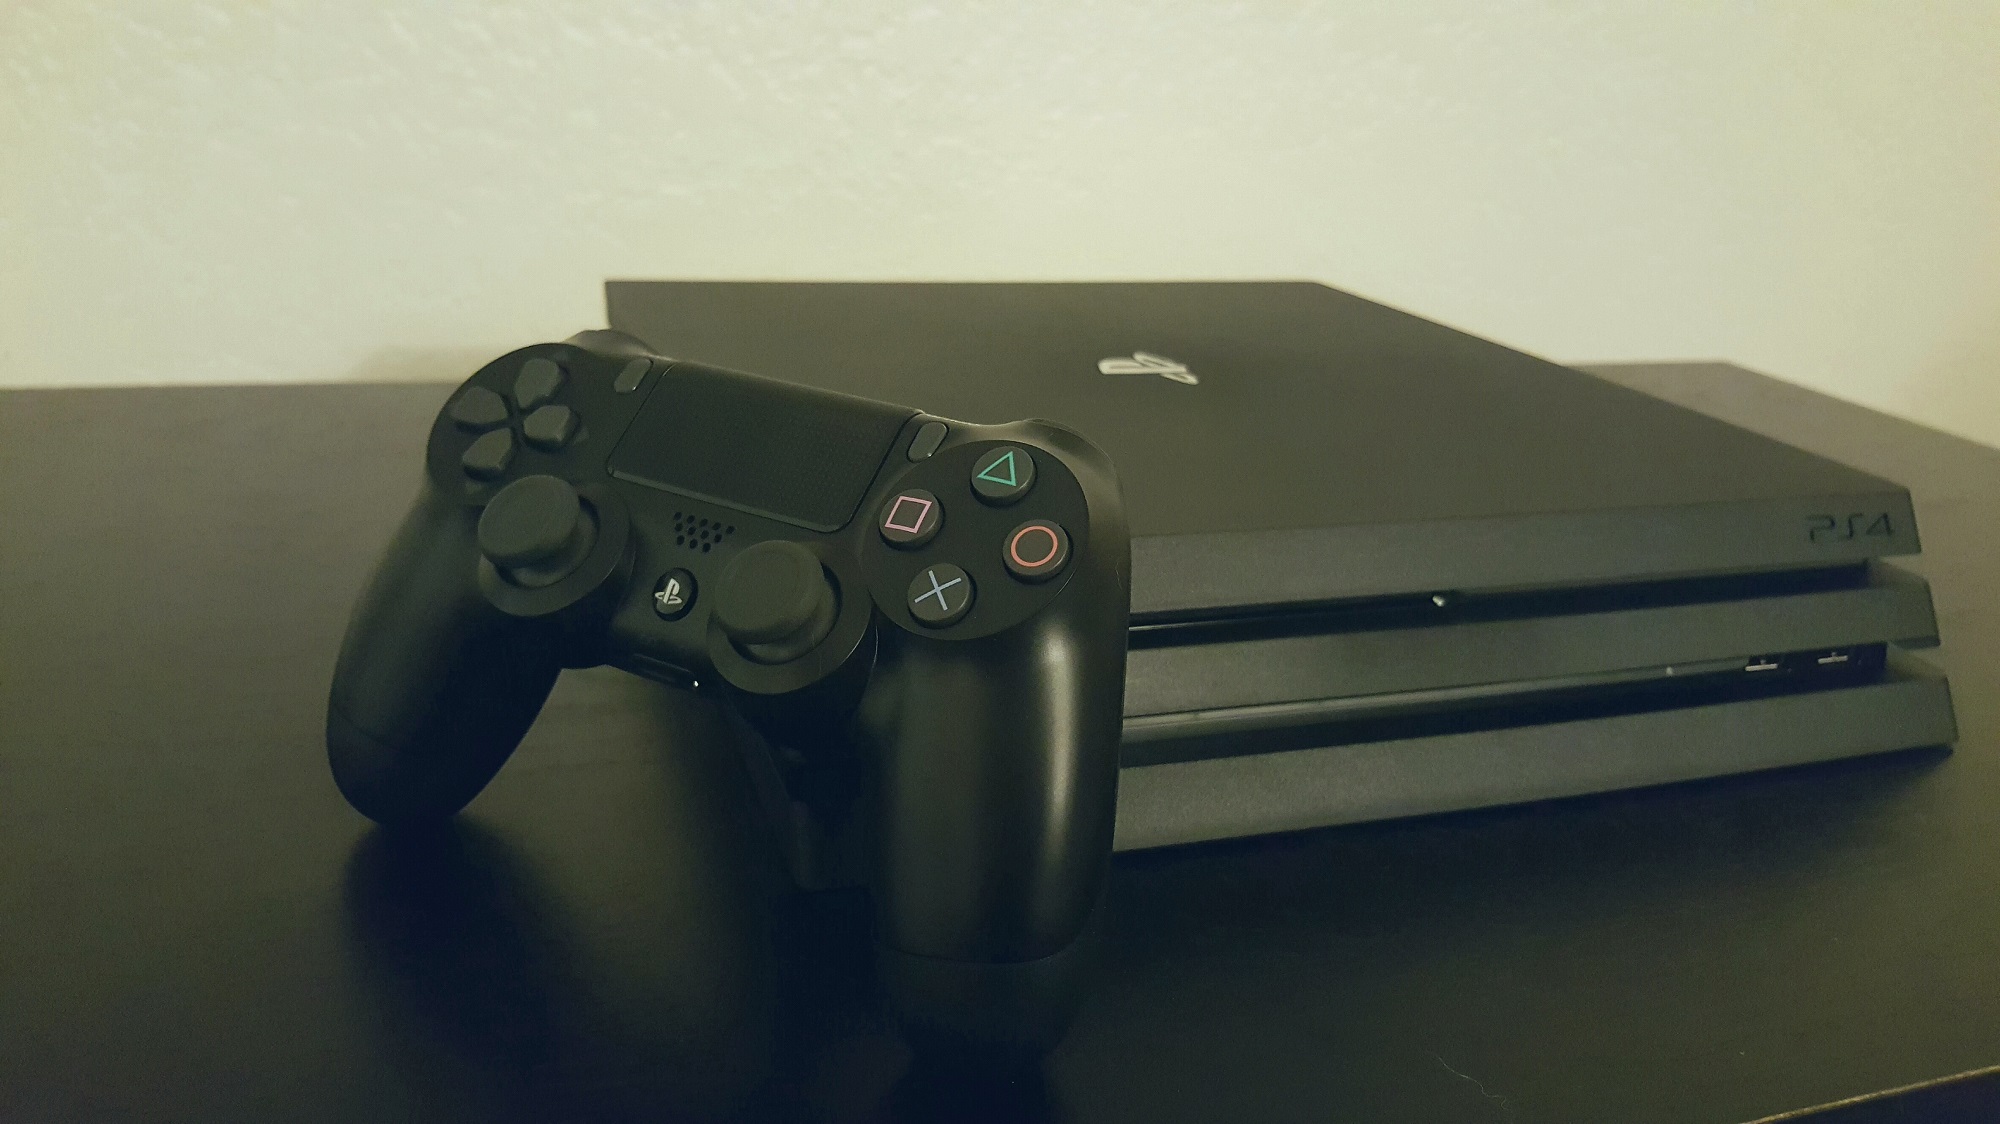 PlayStation 4 Pro Unboxing: New Sony Console and New DualShock 4